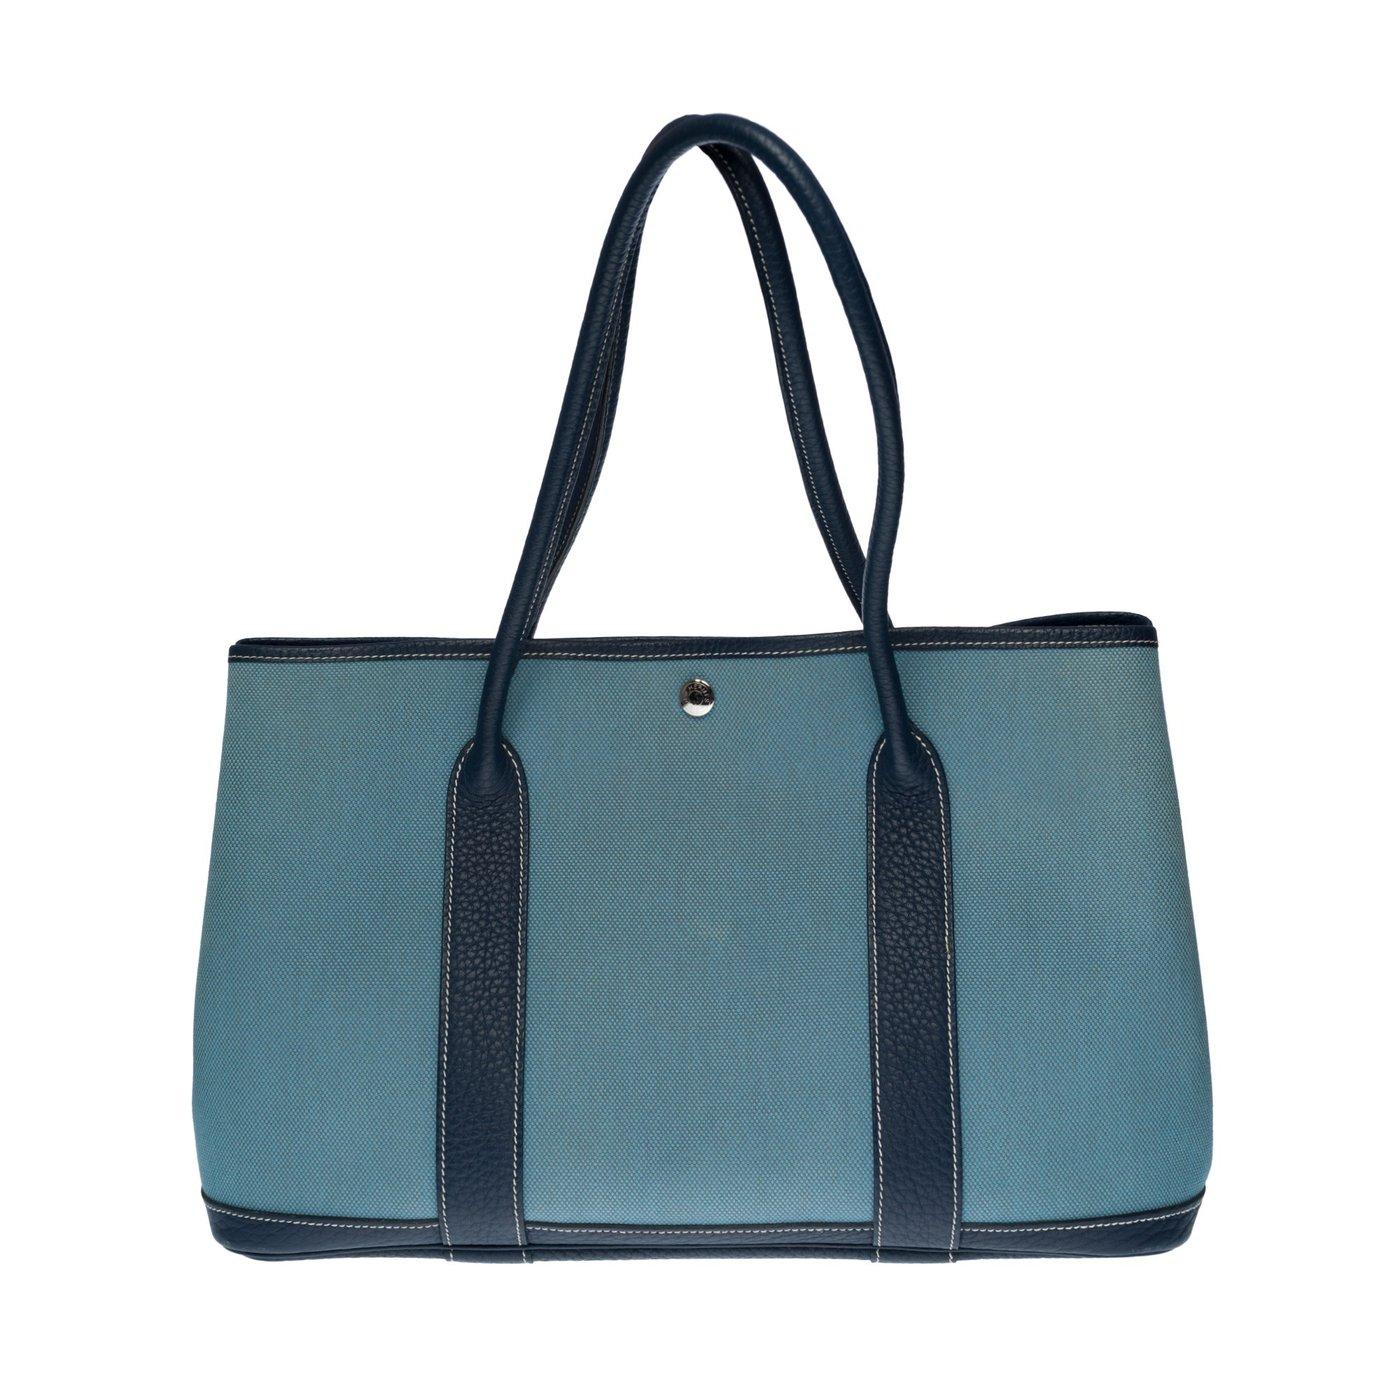 Stunning Hermes Garden party 36 Tote bag  in blue denim canvas and blue leather, double blue leather handle allowing a hand or shoulder support

Fasteners Pressures patterned silver metal saddle nails
Blue canvas interior
Signature: 